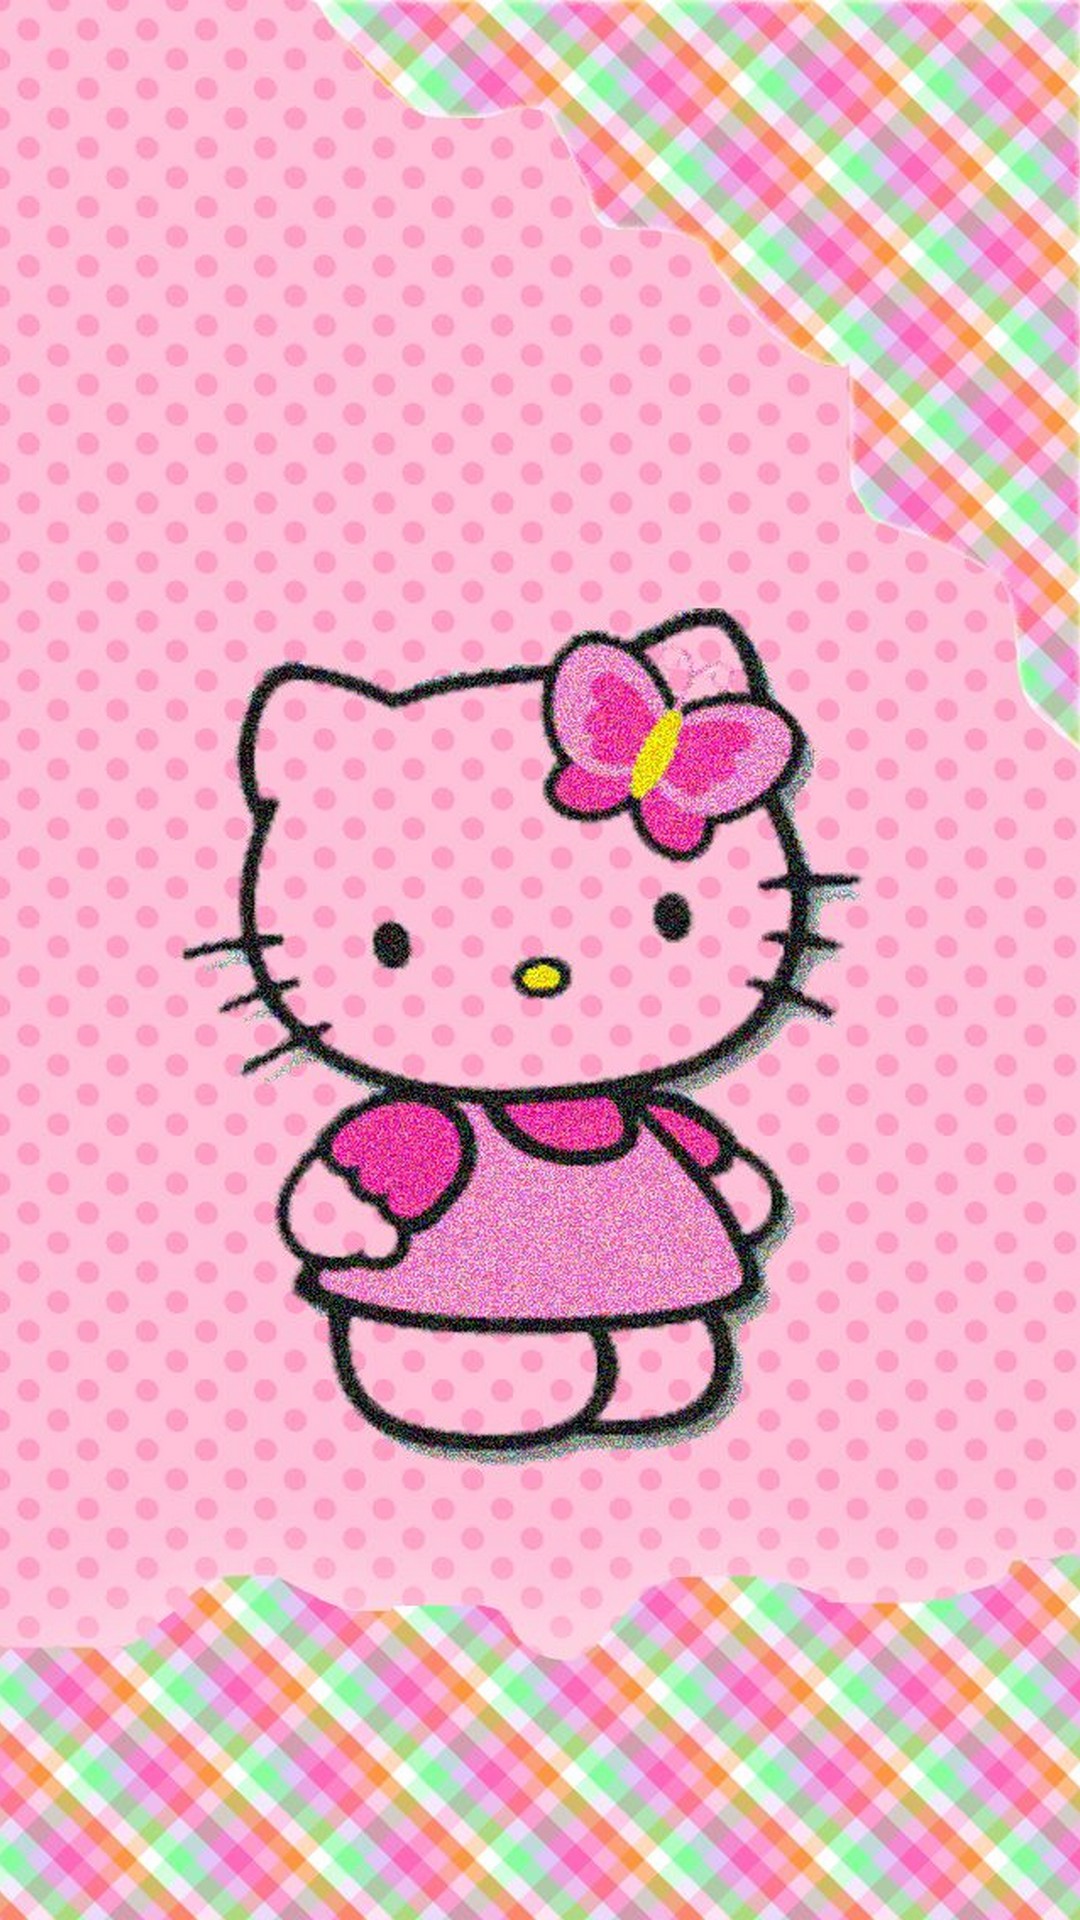 Hello Kitty Wallpaper For iPhone with image resolution 1080x1920 pixel. You can make this wallpaper for your iPhone 5, 6, 7, 8, X backgrounds, Mobile Screensaver, or iPad Lock Screen